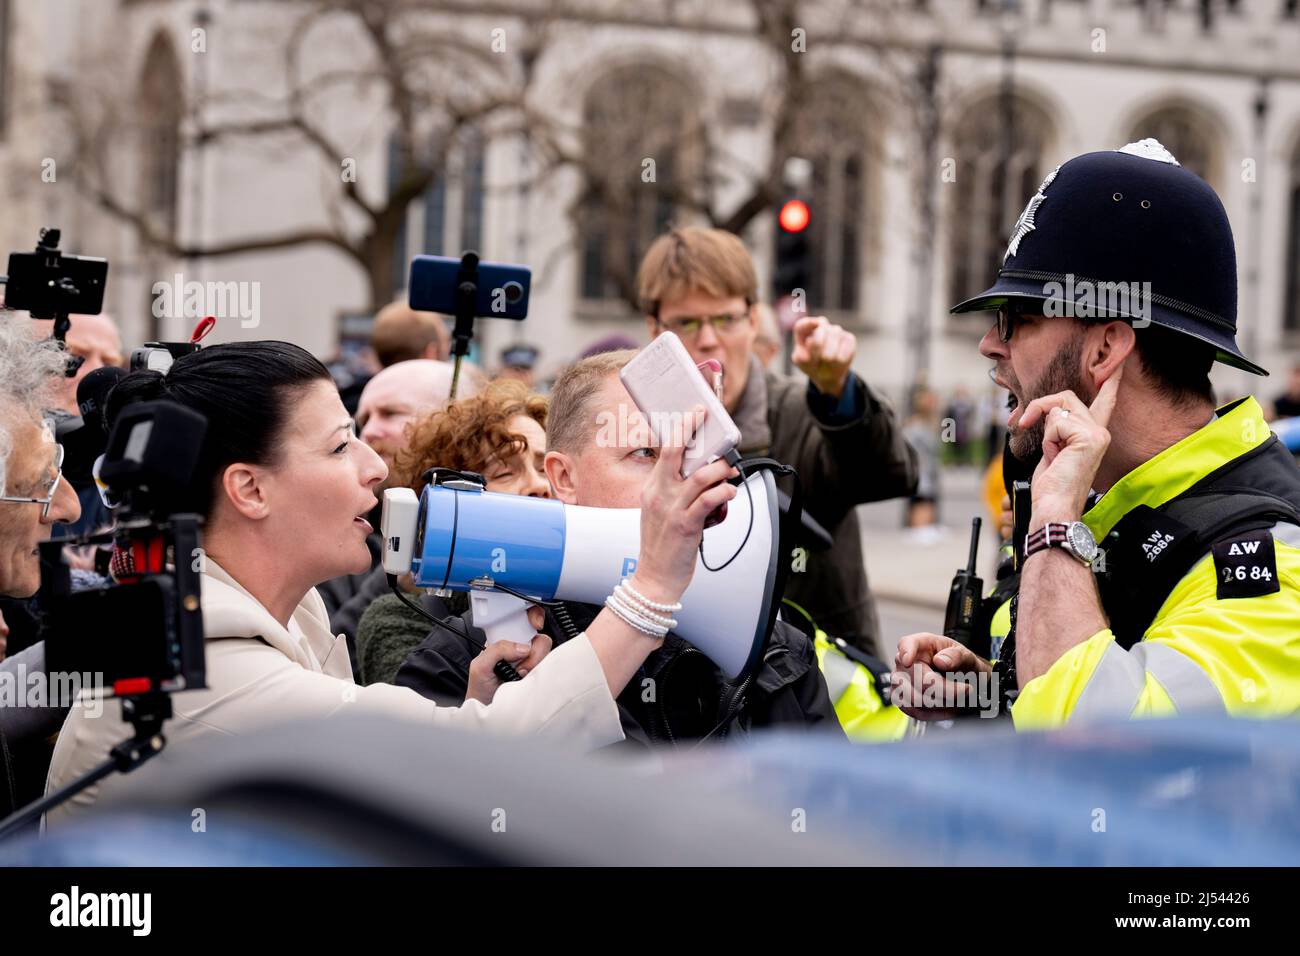 As Prime Minister Boris Johnson was due to apologise to parliament about his fixed-penalty fine for being present at a party during his own Covid pandemic restrictions, anti-vaxx freedom of speech protesters block the gates of parliament during an altercation with Tory MP Bob Blackman, on 19th April 2022, in London, England. The Met police continue to investigate Johnson and his staff as news of more lockdown party fines are expected to be revealed by police. Stock Photo